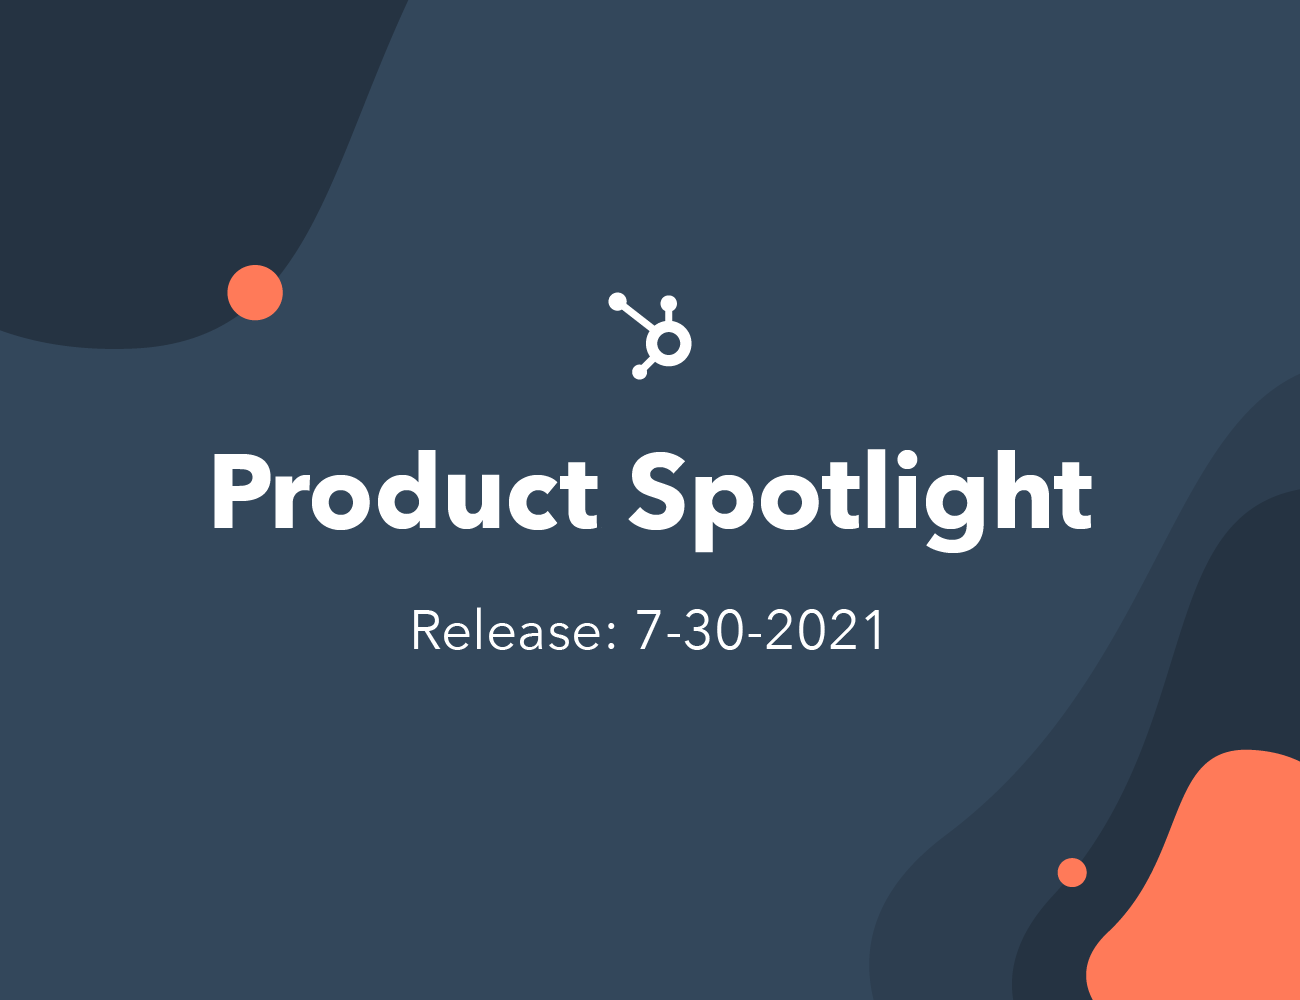 The Complete List of July 2021 Product Updates